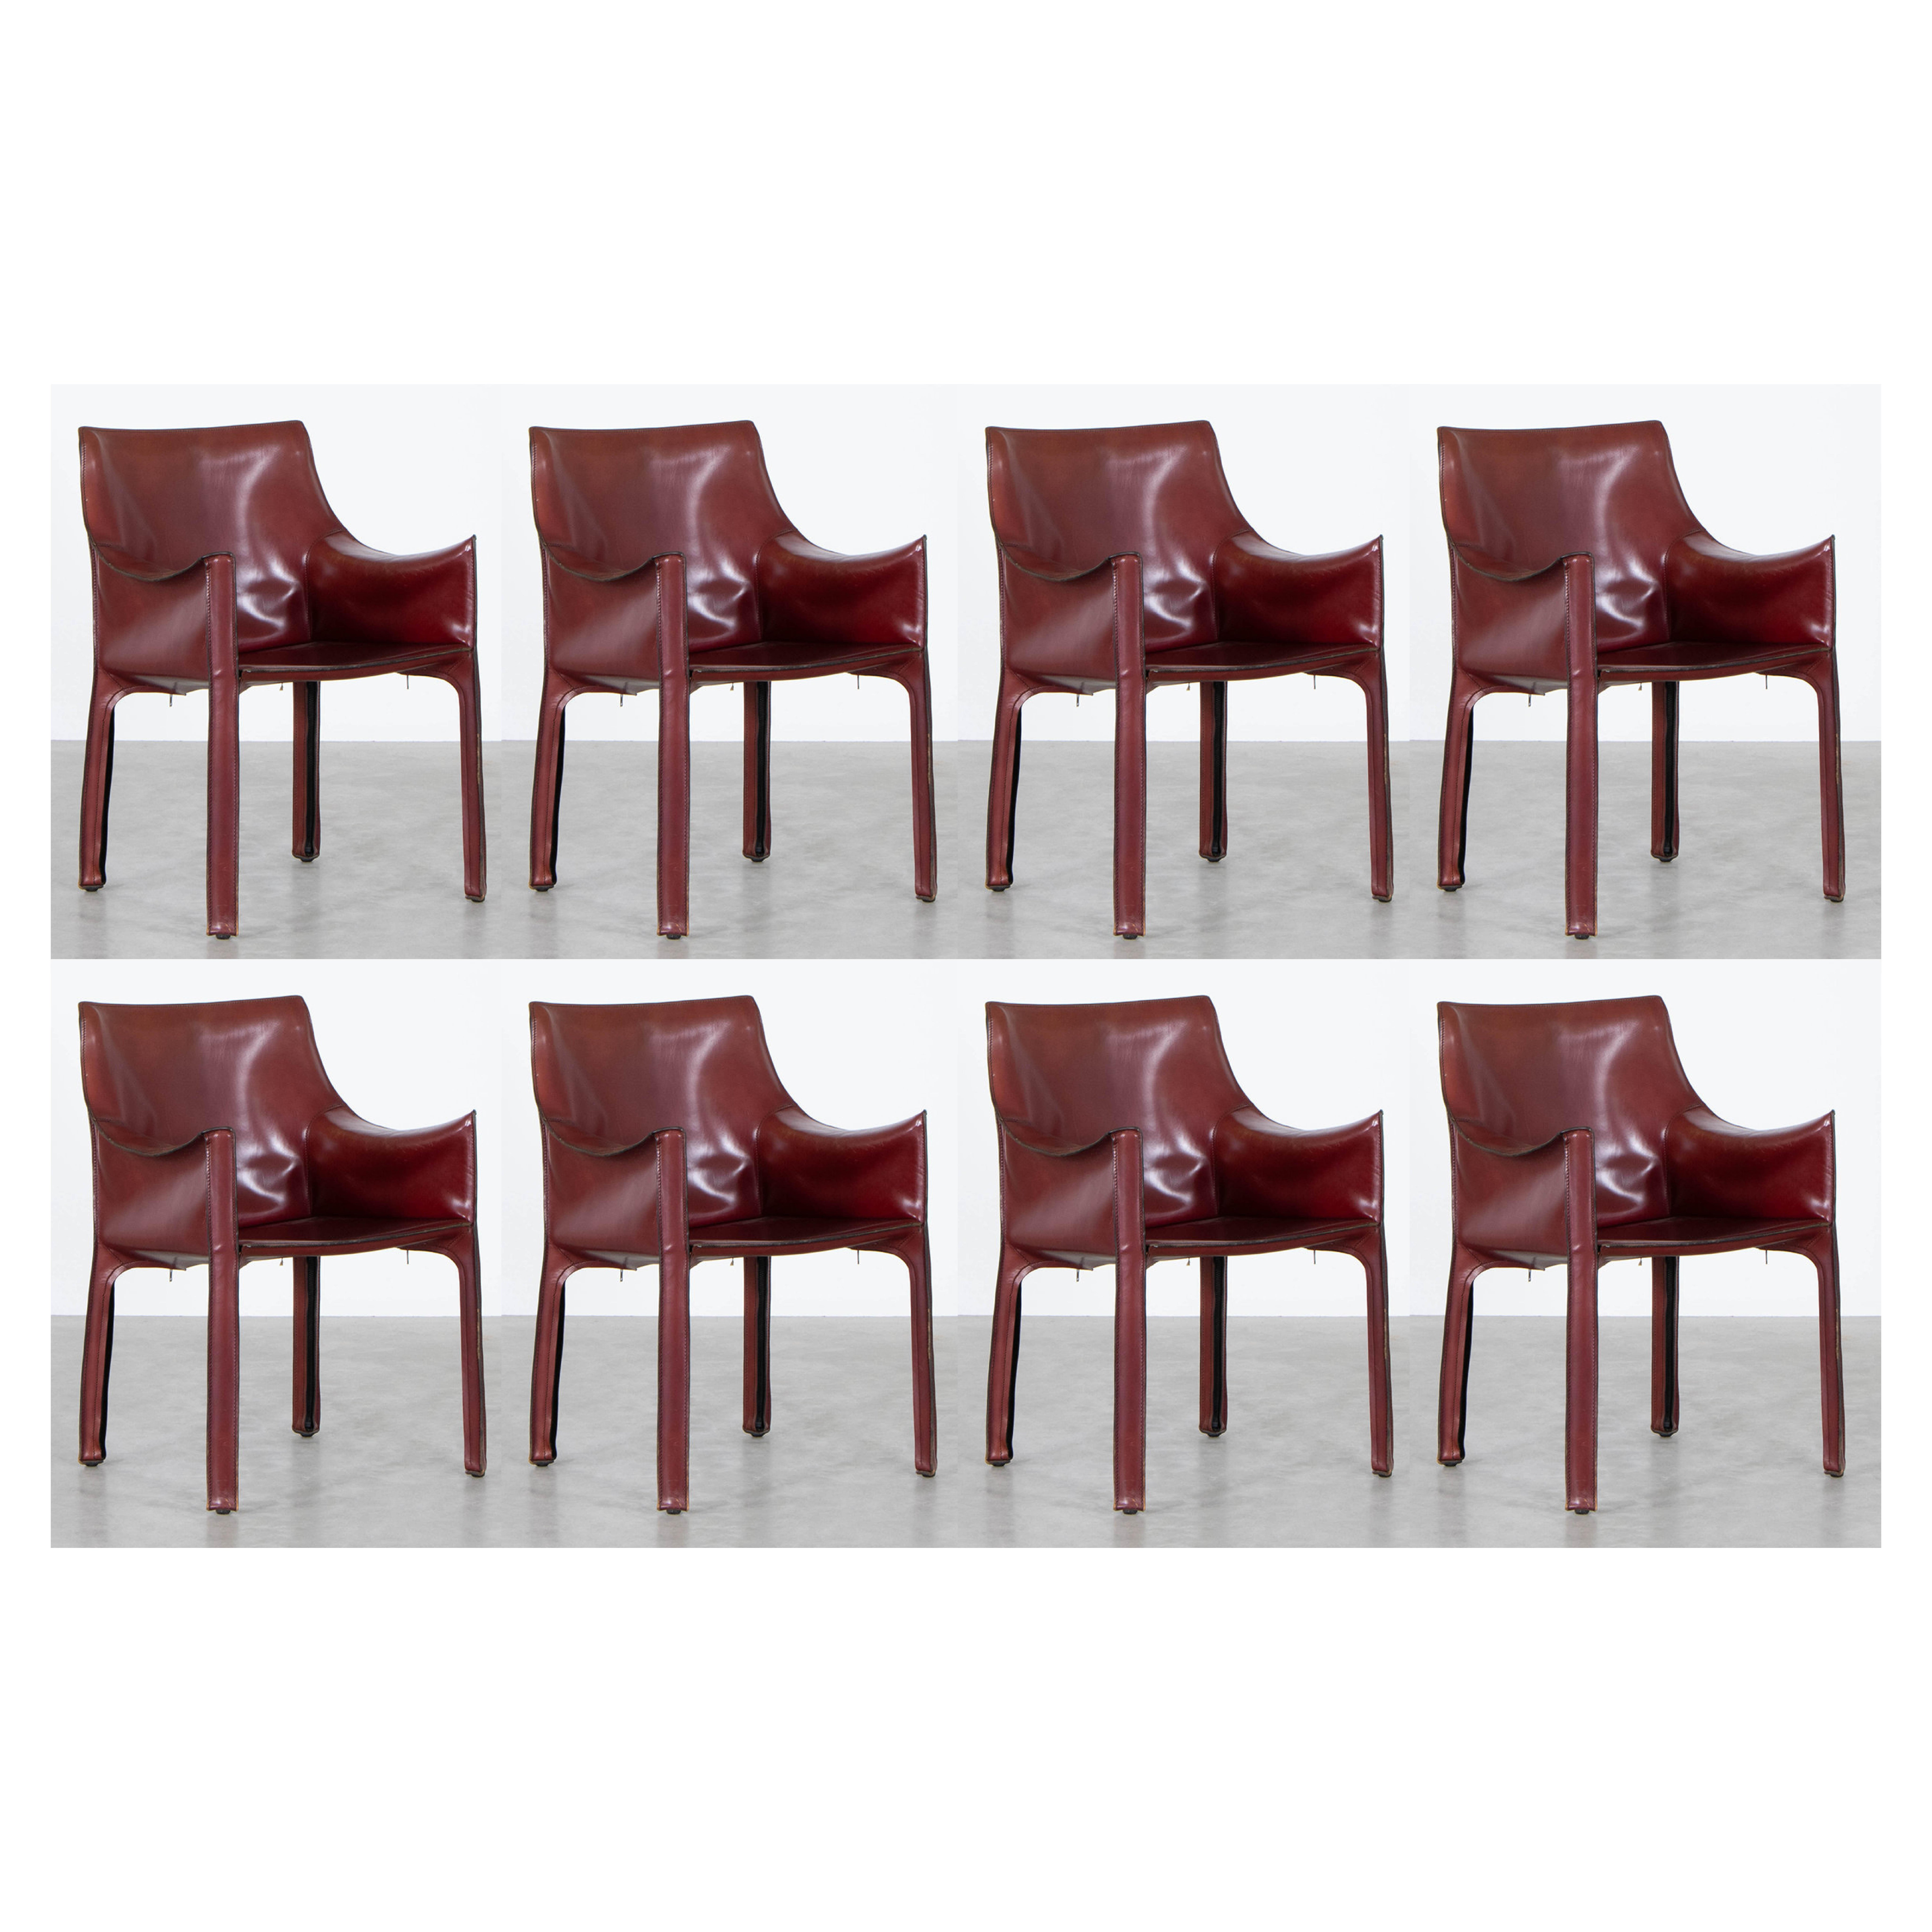 Mario Bellini "CAB 413" Chairs for Cassina in Bordeaux, 1977, Set of 8